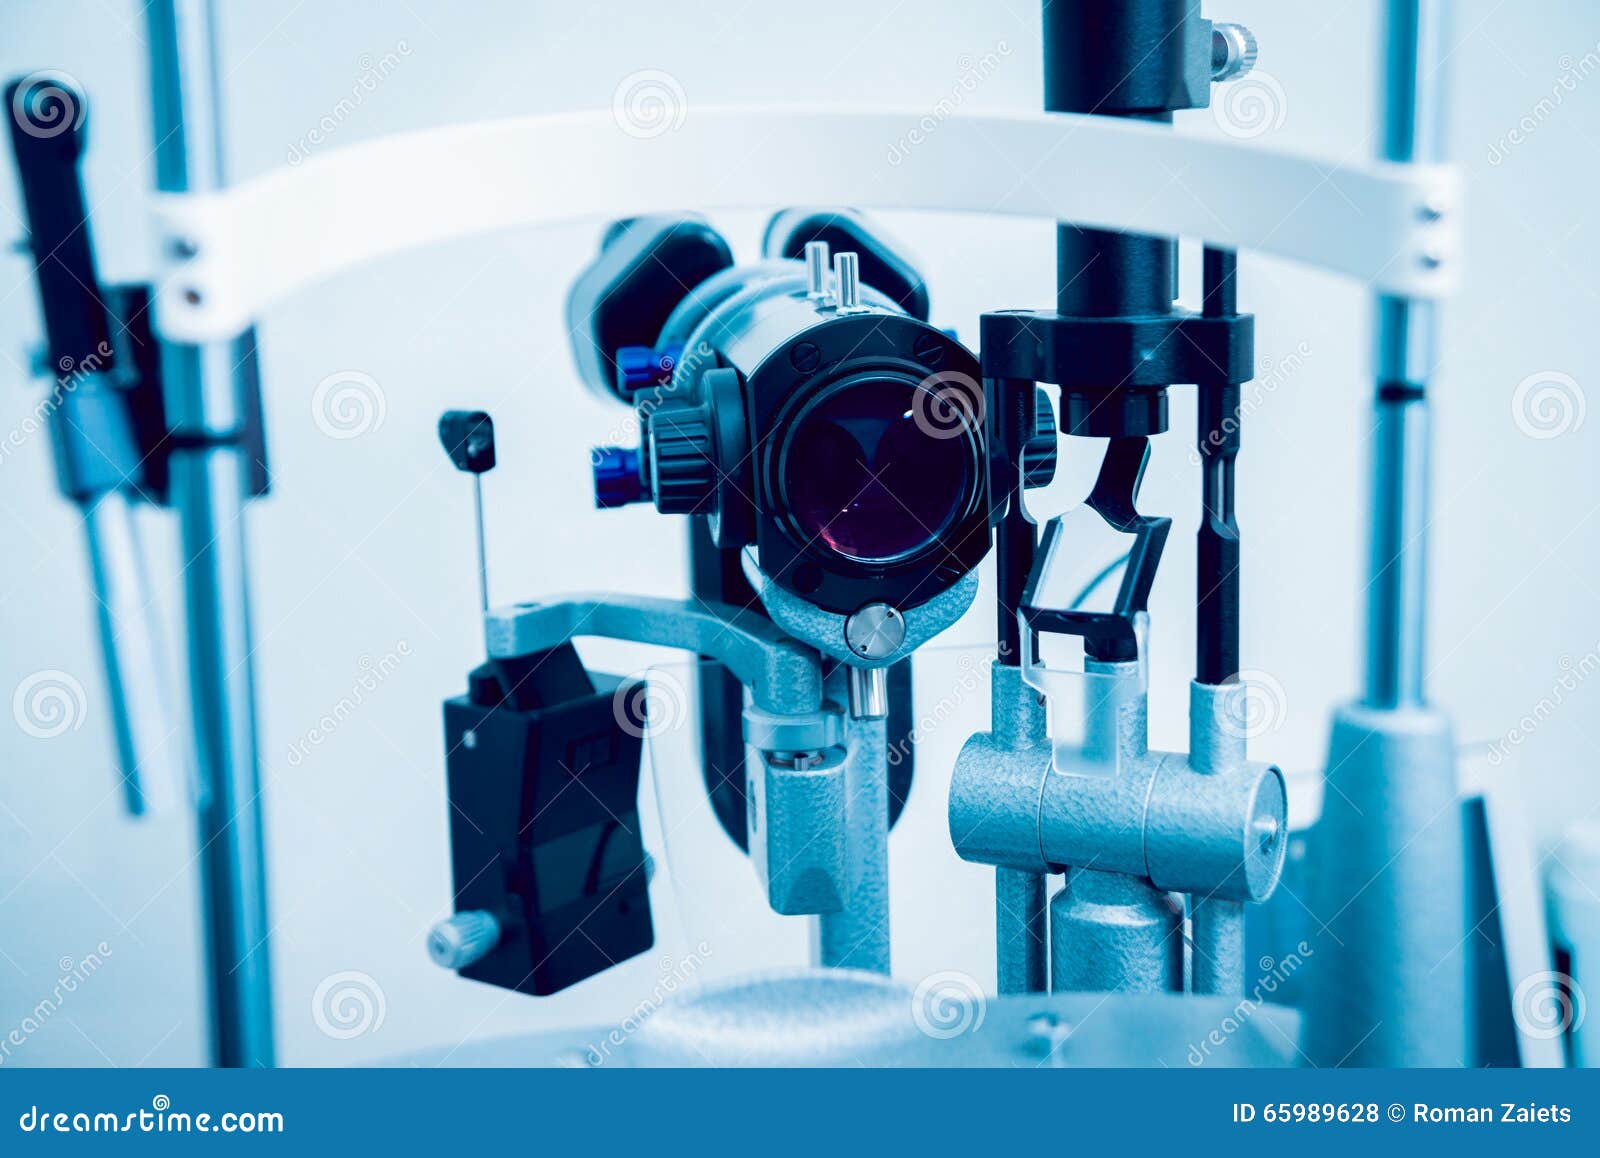 ophthalmic equipment. medical